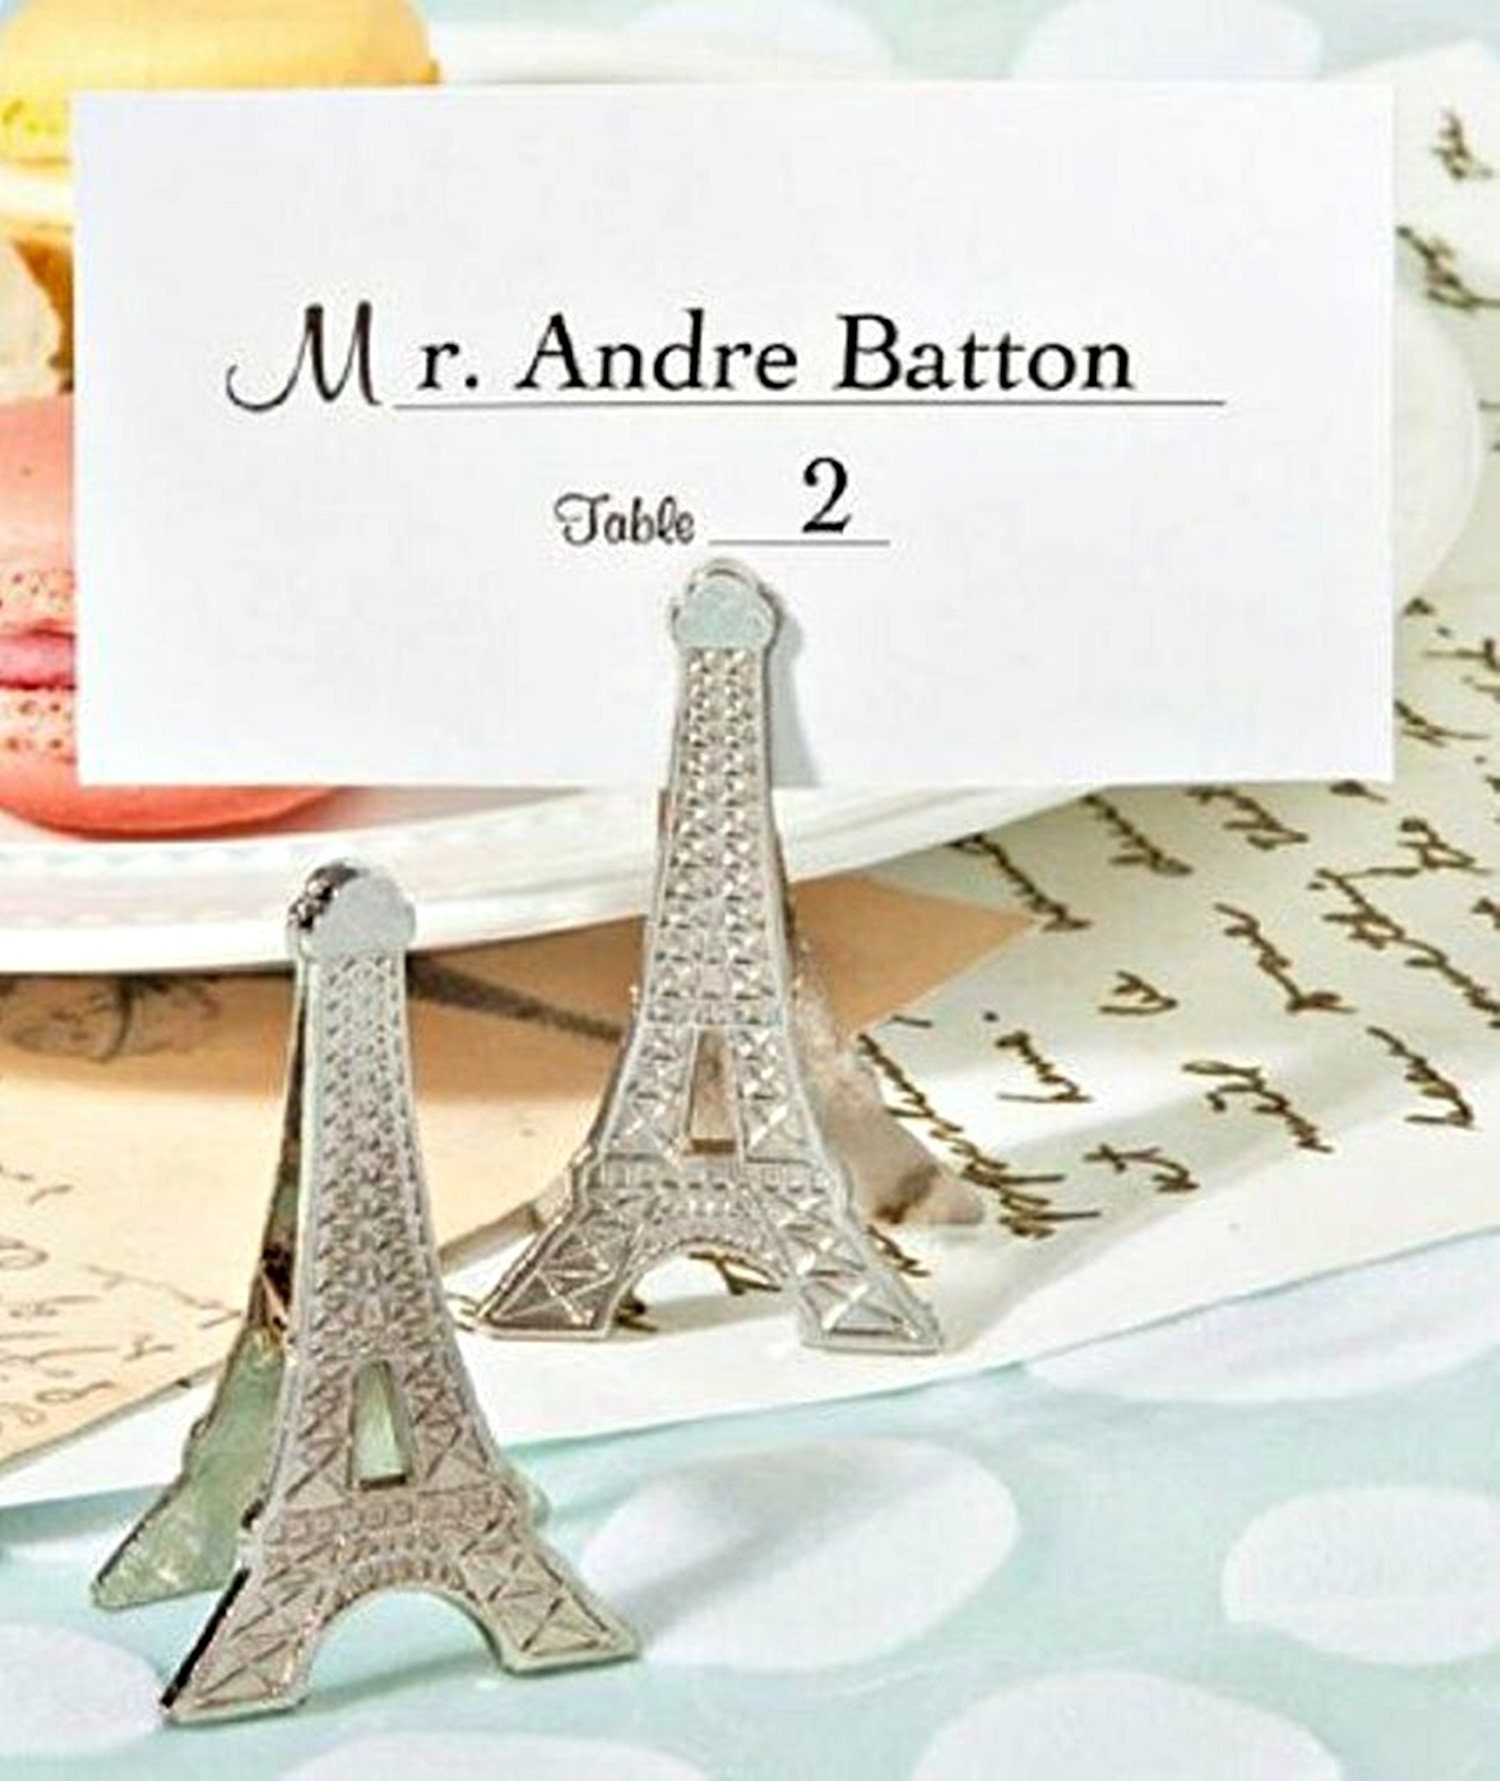 Eiffel Tower Design Set of 6 Place Card Holder 2" high Silver Metal 